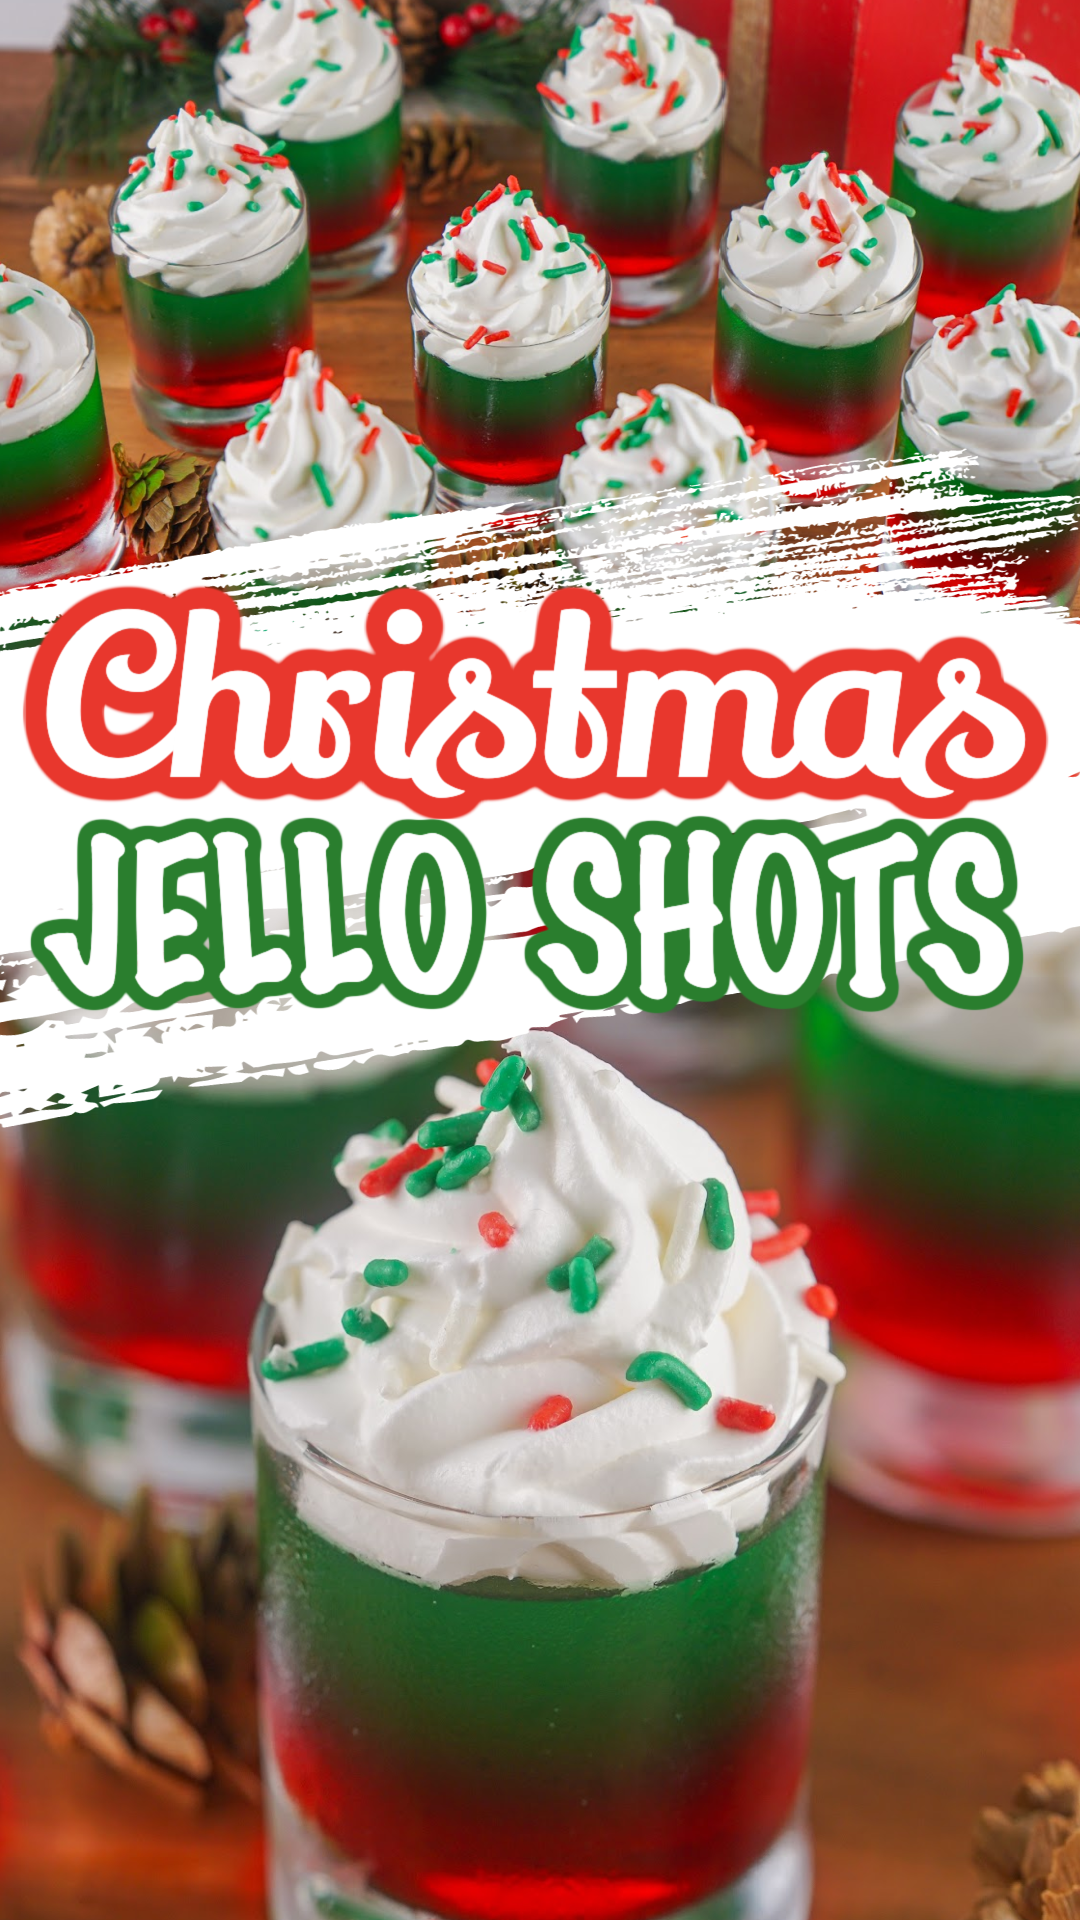 red and green layered Christmas jello shots topped with wiped cream and Christmas sprinkles.